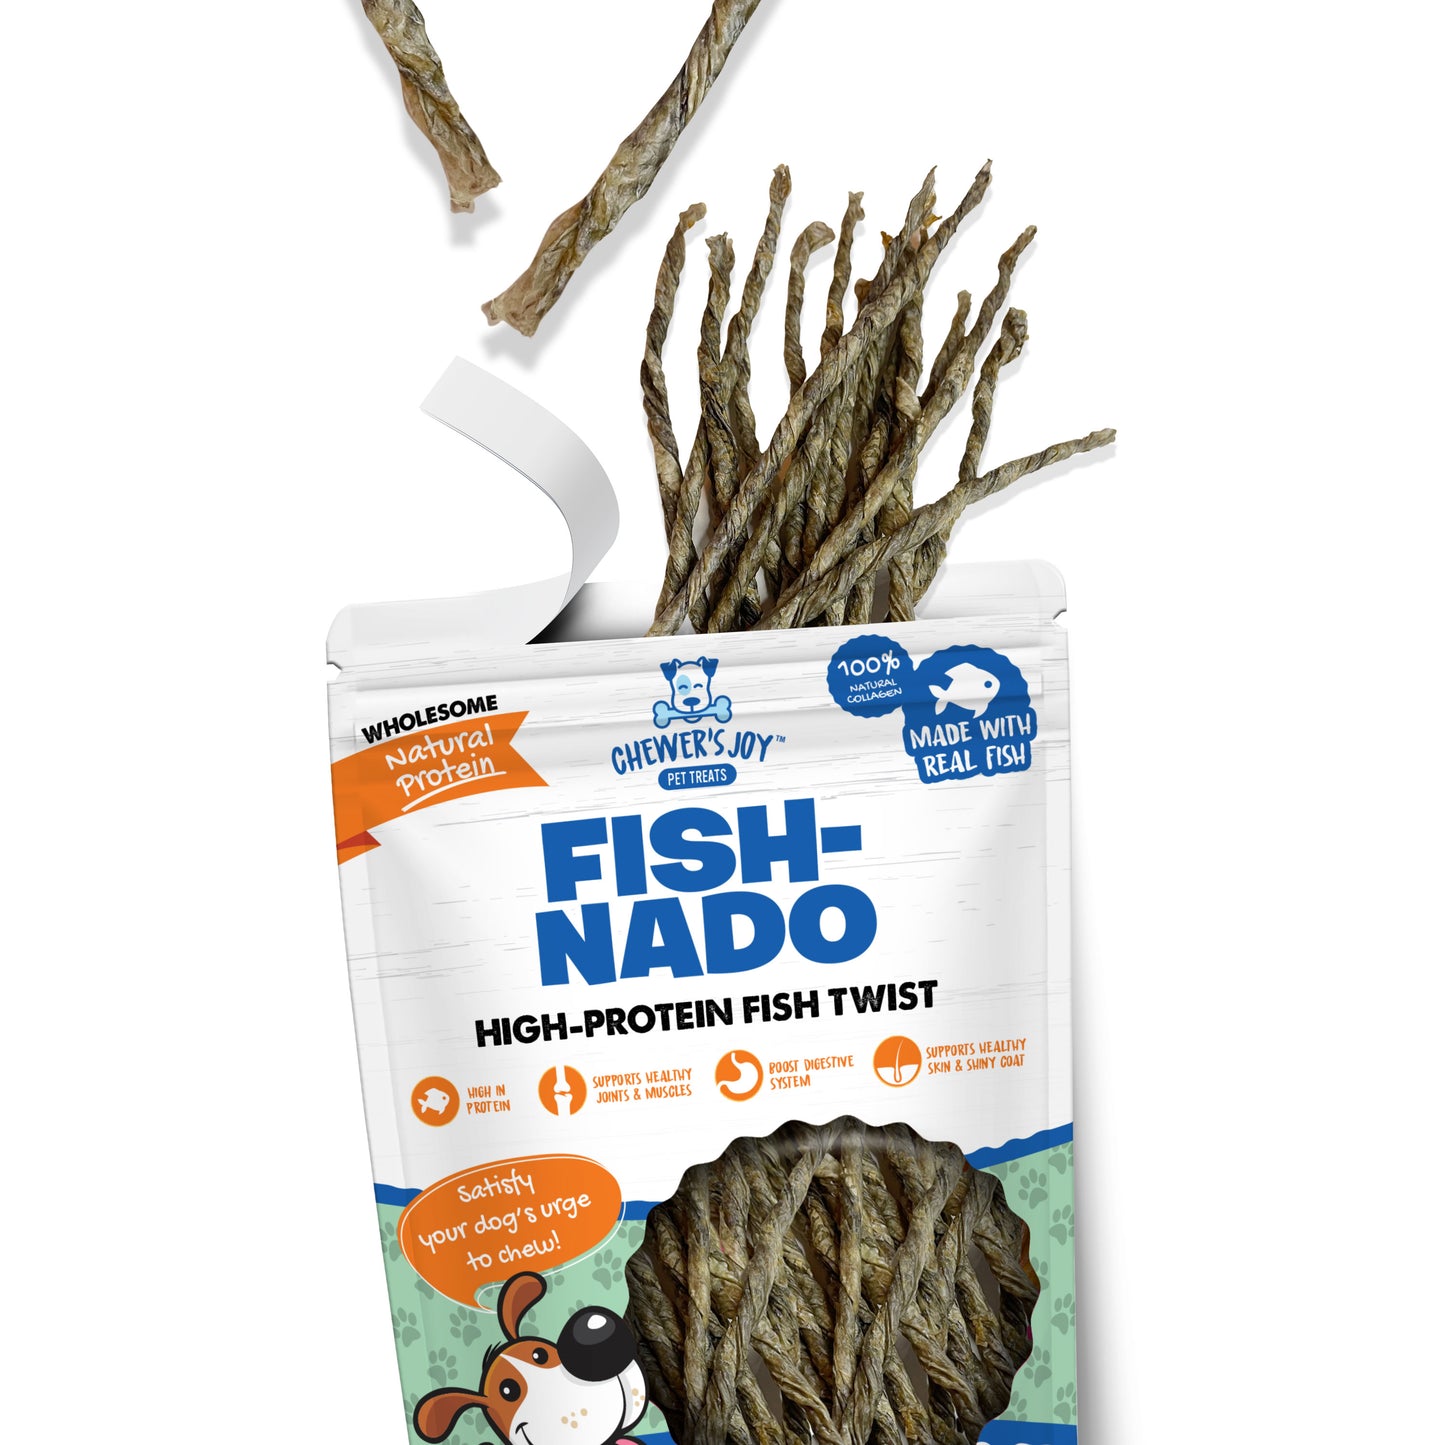 Chewer's Joy Fish-Nado, Fish Skin Twist -  3oz Dog Treats, Excellent Source of Omega Fatty Acids and Collagen to Help Support Joints, Eye, Heart, and Brain Functions. Promotes a Healthy Skin and Shiny Coat. High in Protein.